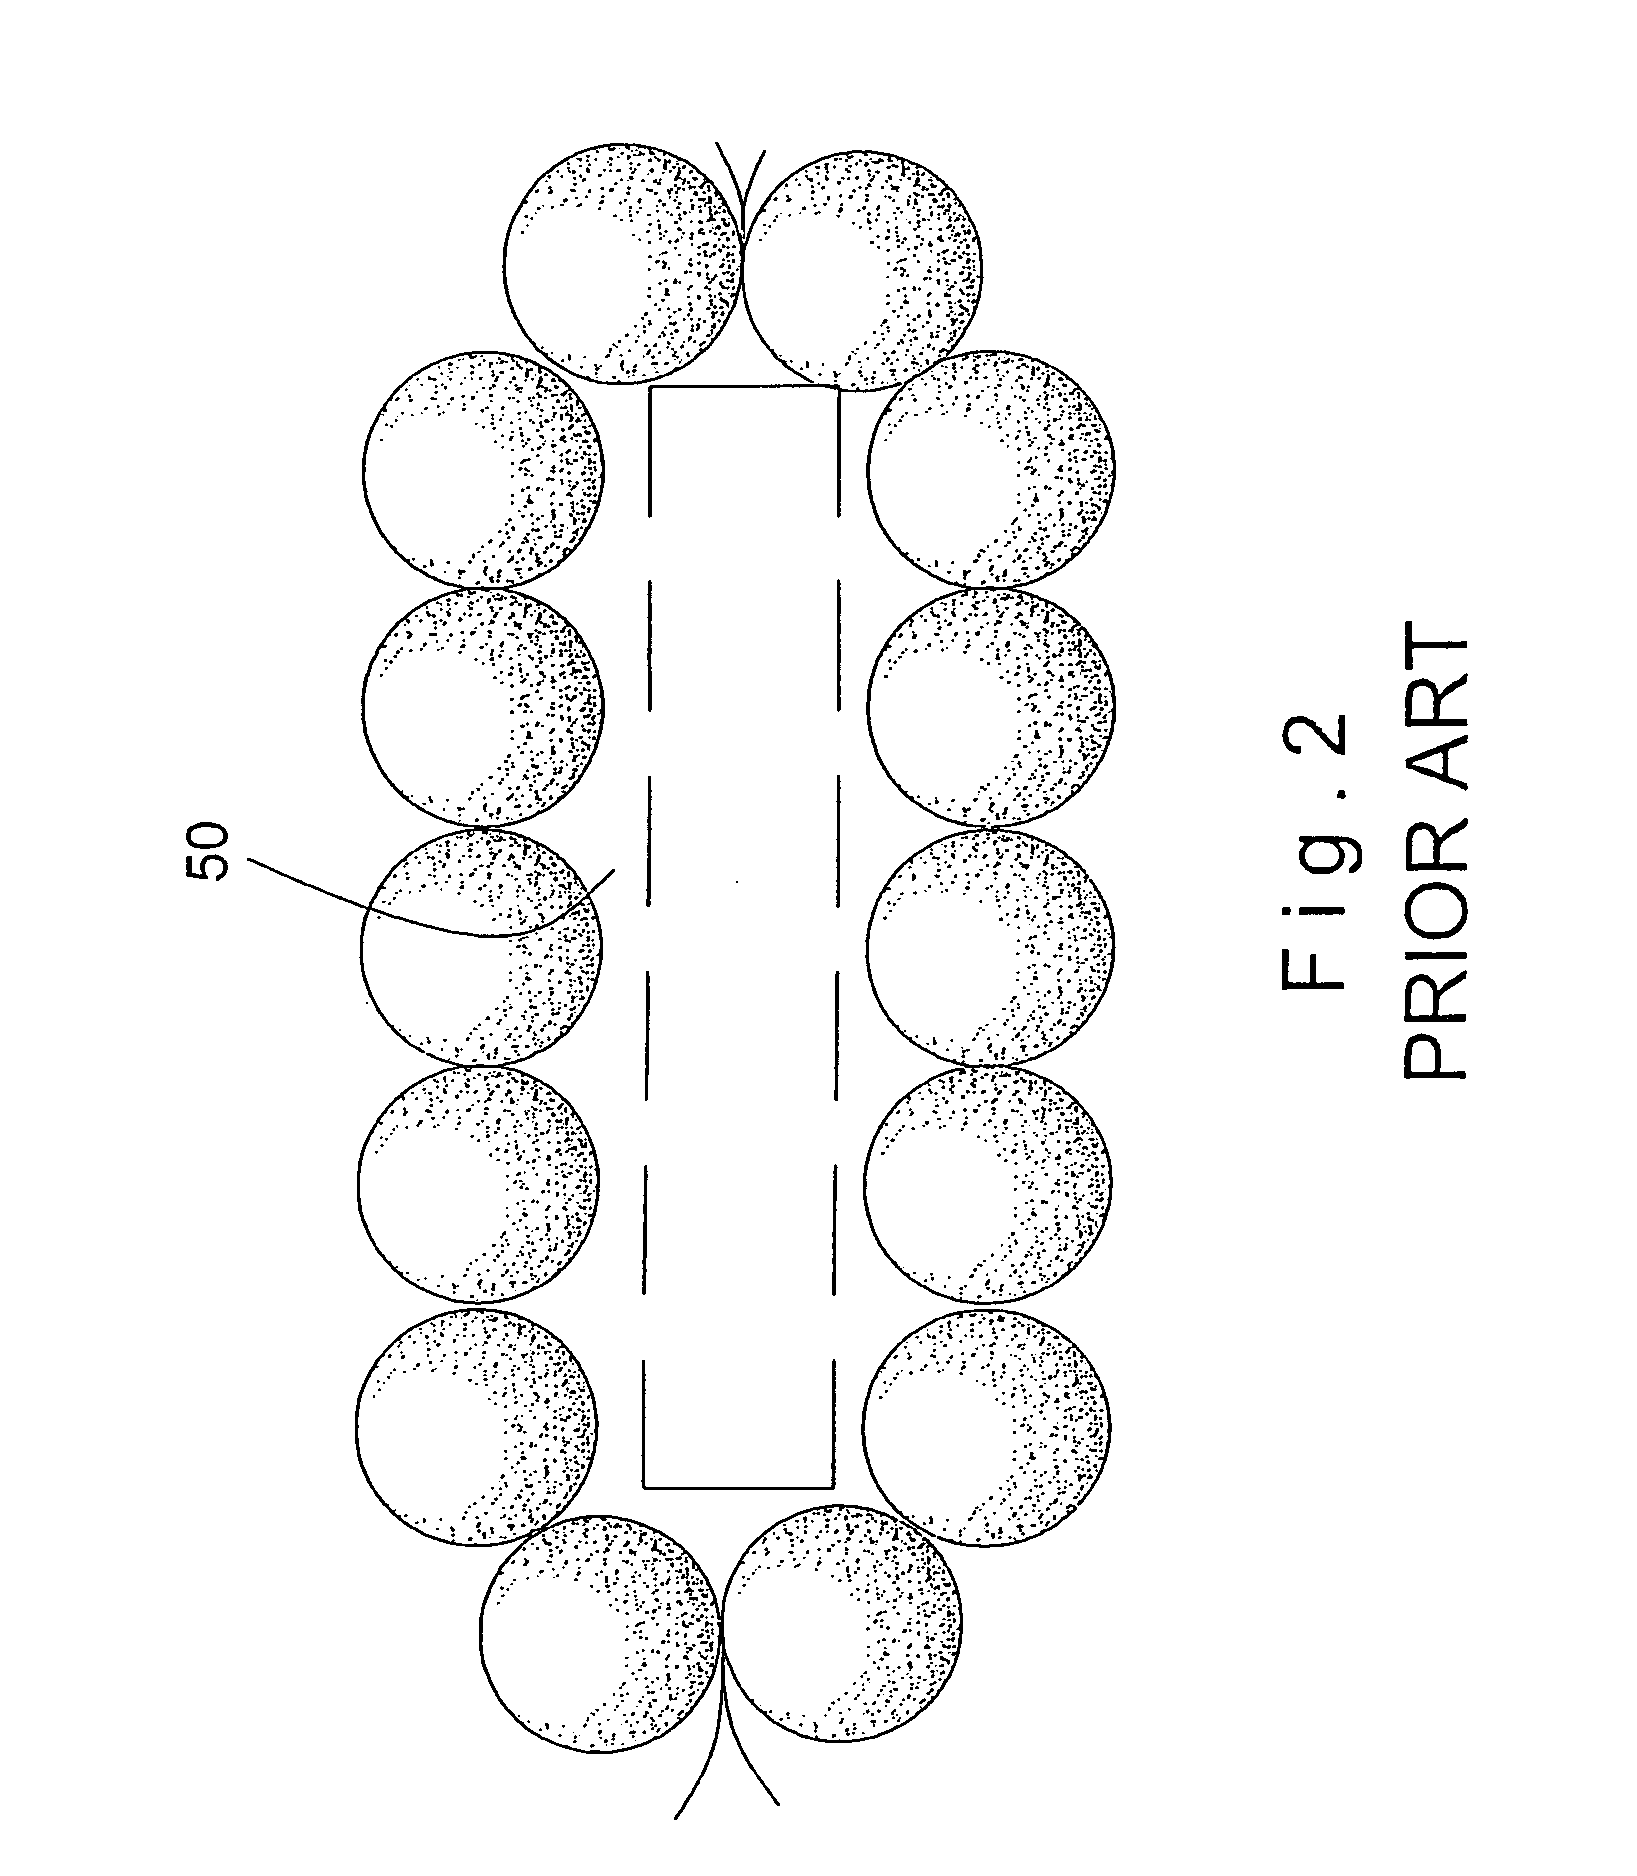 Air packaging device product and method for forming the product